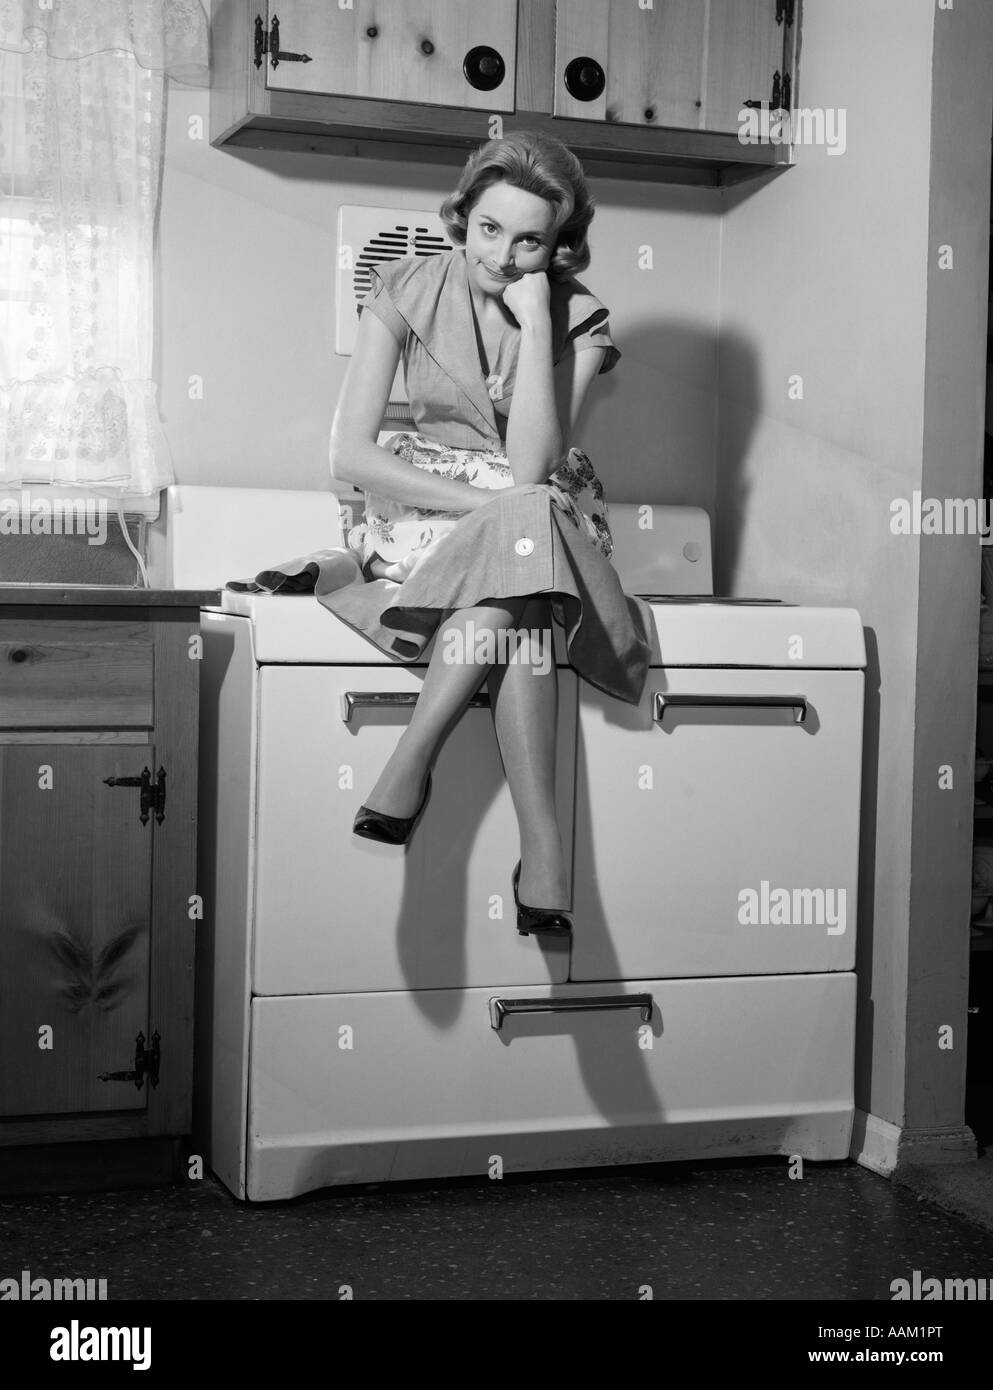 1950s 1960s WOMAN HOUSEWIFE SITTING ATOP ON STOVE ANGRY FRUSTRATED SERIOUS FACIAL EXPRESSION Stock Photo